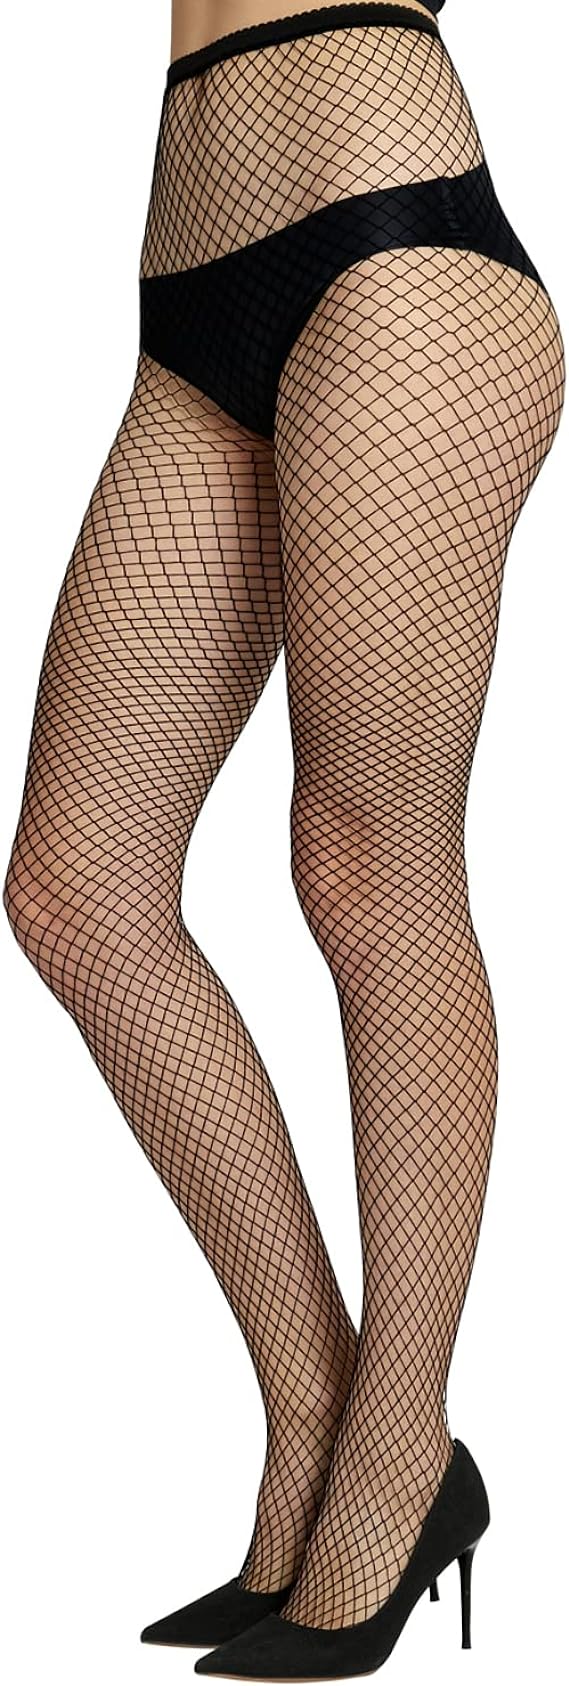 WEANMIX Fishnet Tights | 40plusstyle.com